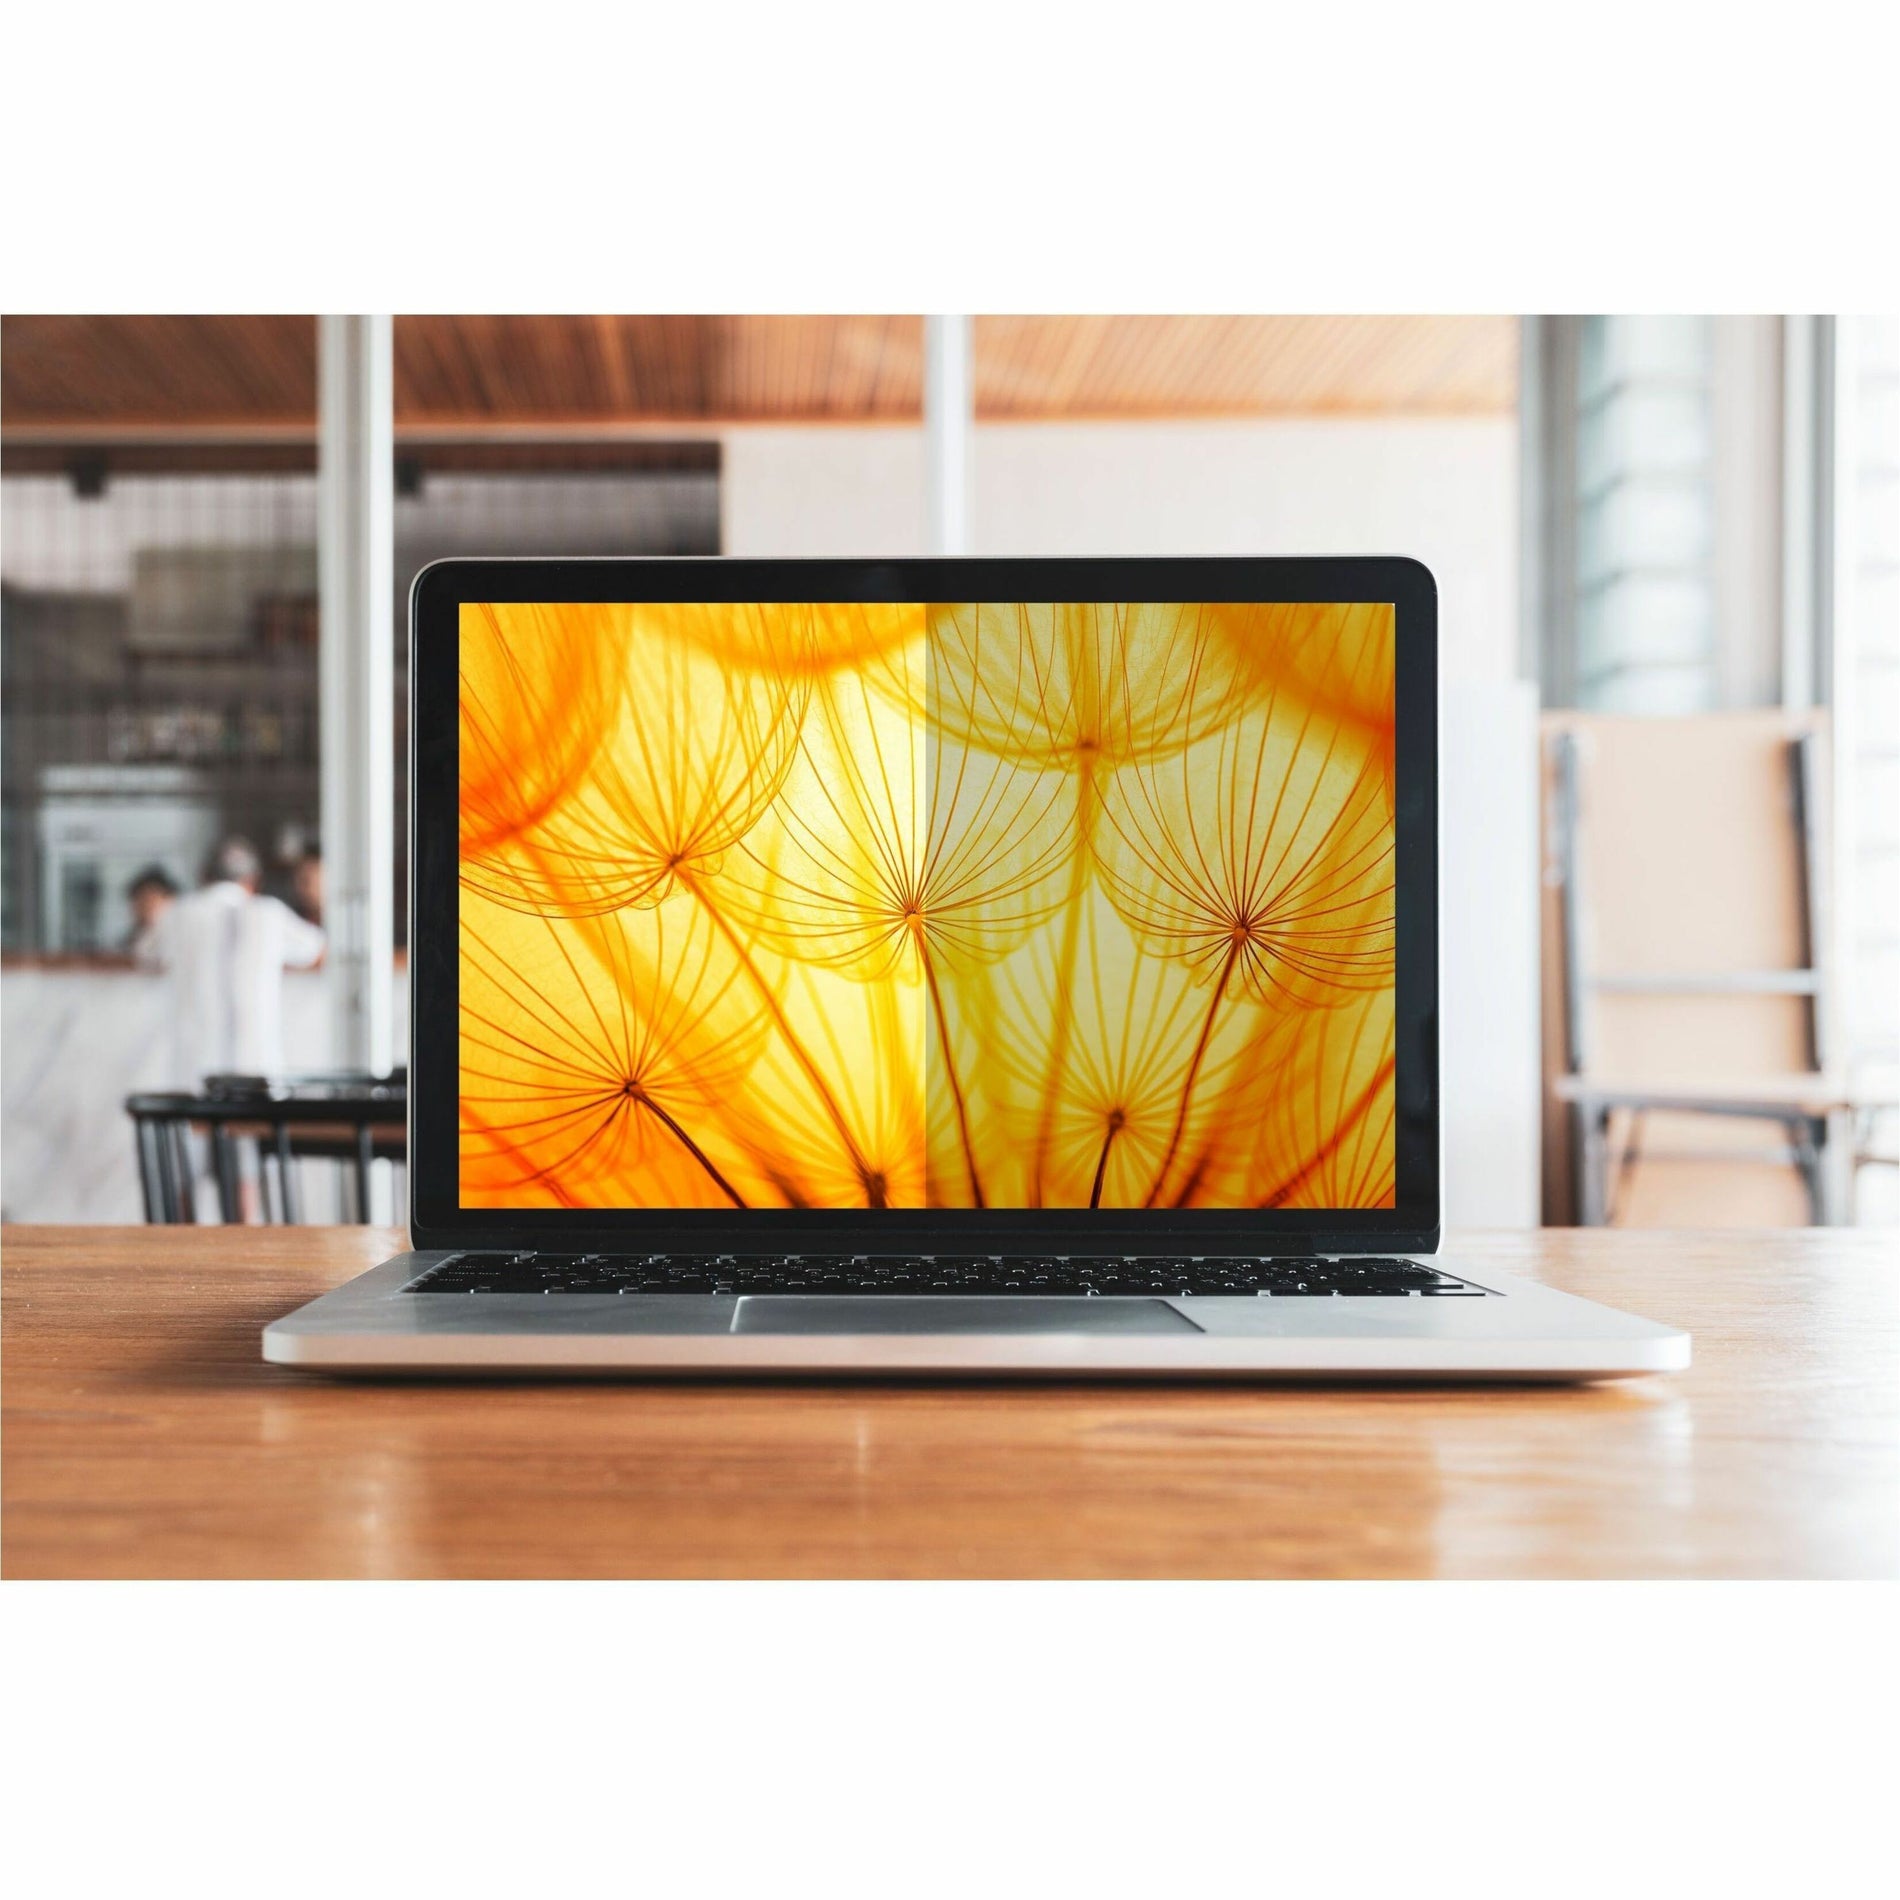 3M BP140W1B Bright Screen Privacy Filter for 14in Laptop, 16:10, Ultra Slim, Blue Light Reduction, Matte Black